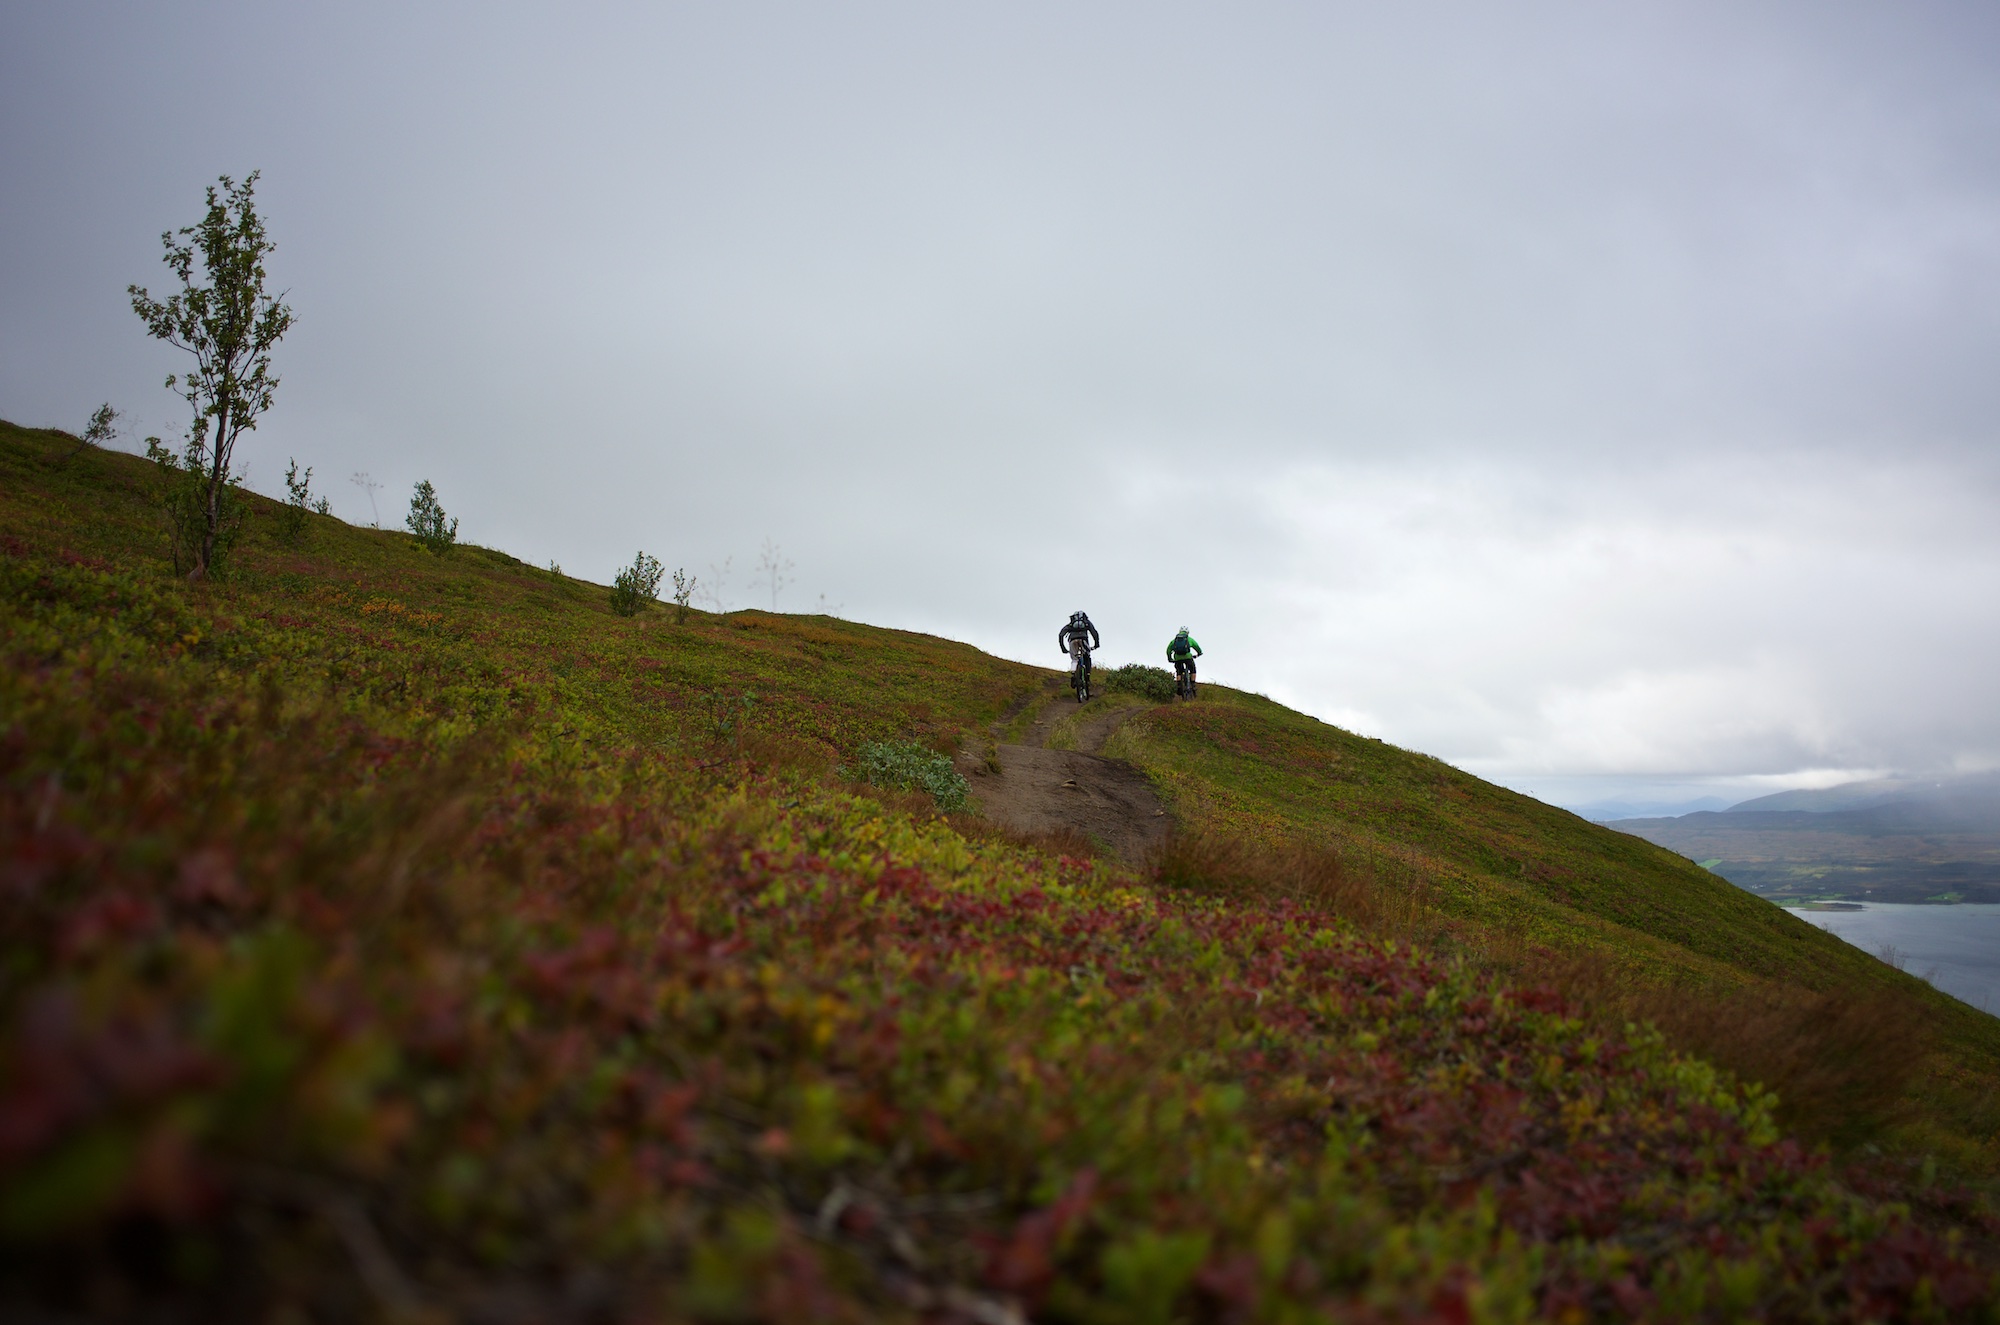 Kenneth and Gustav enjoy the wind and the contouring trail in soon to be full autumn glory.